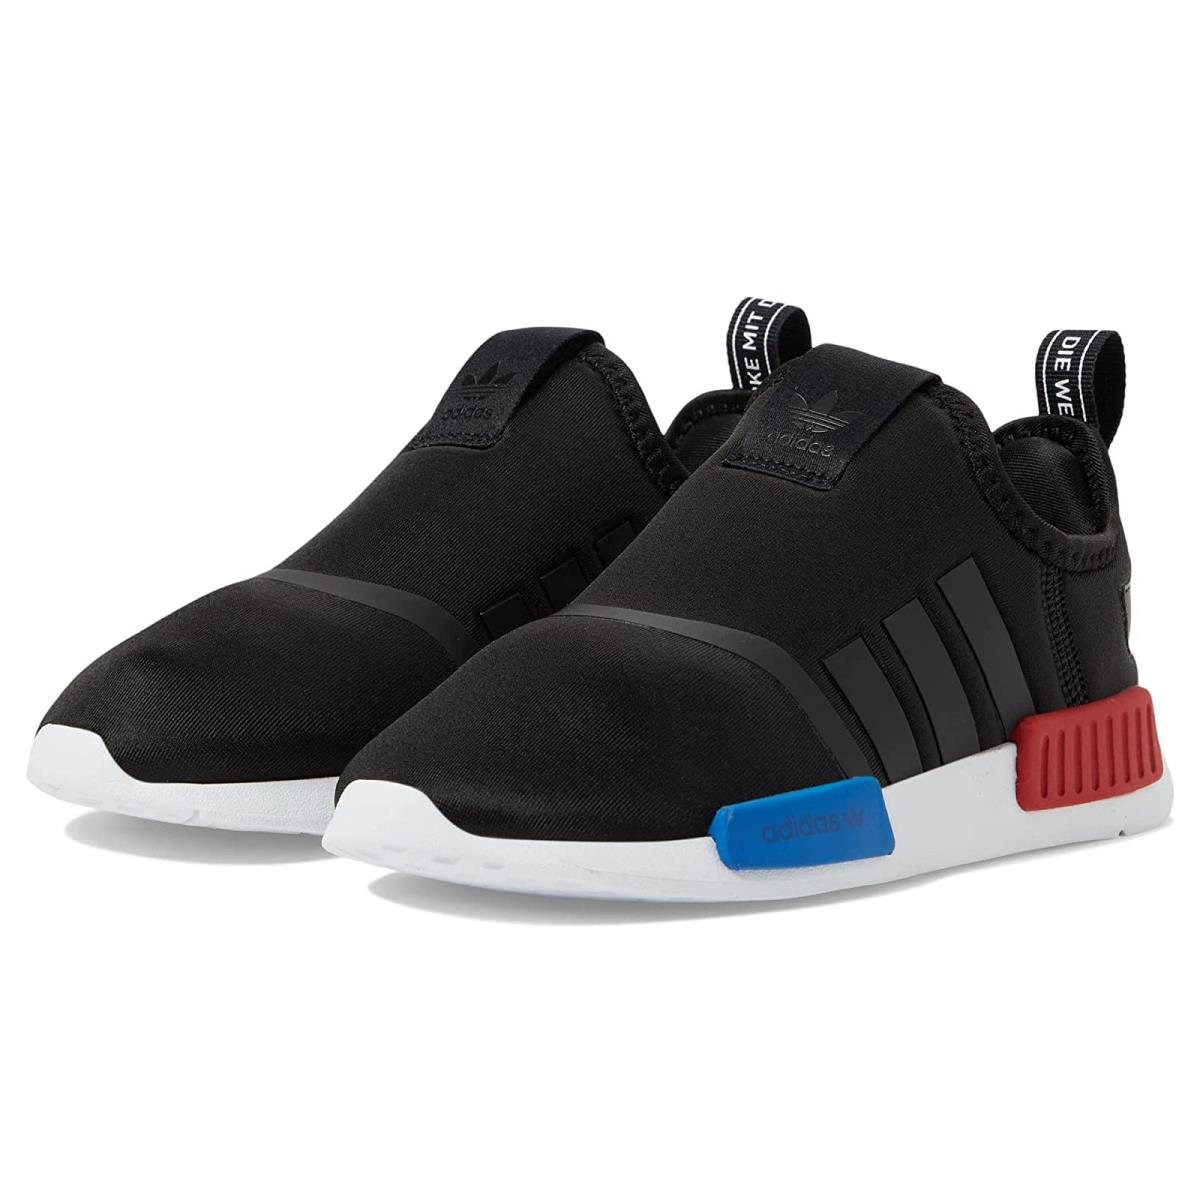 Boy`s Sneakers Athletic Shoes Adidas Originals Kids Nmd 360 Toddler Black/White/Scarlet